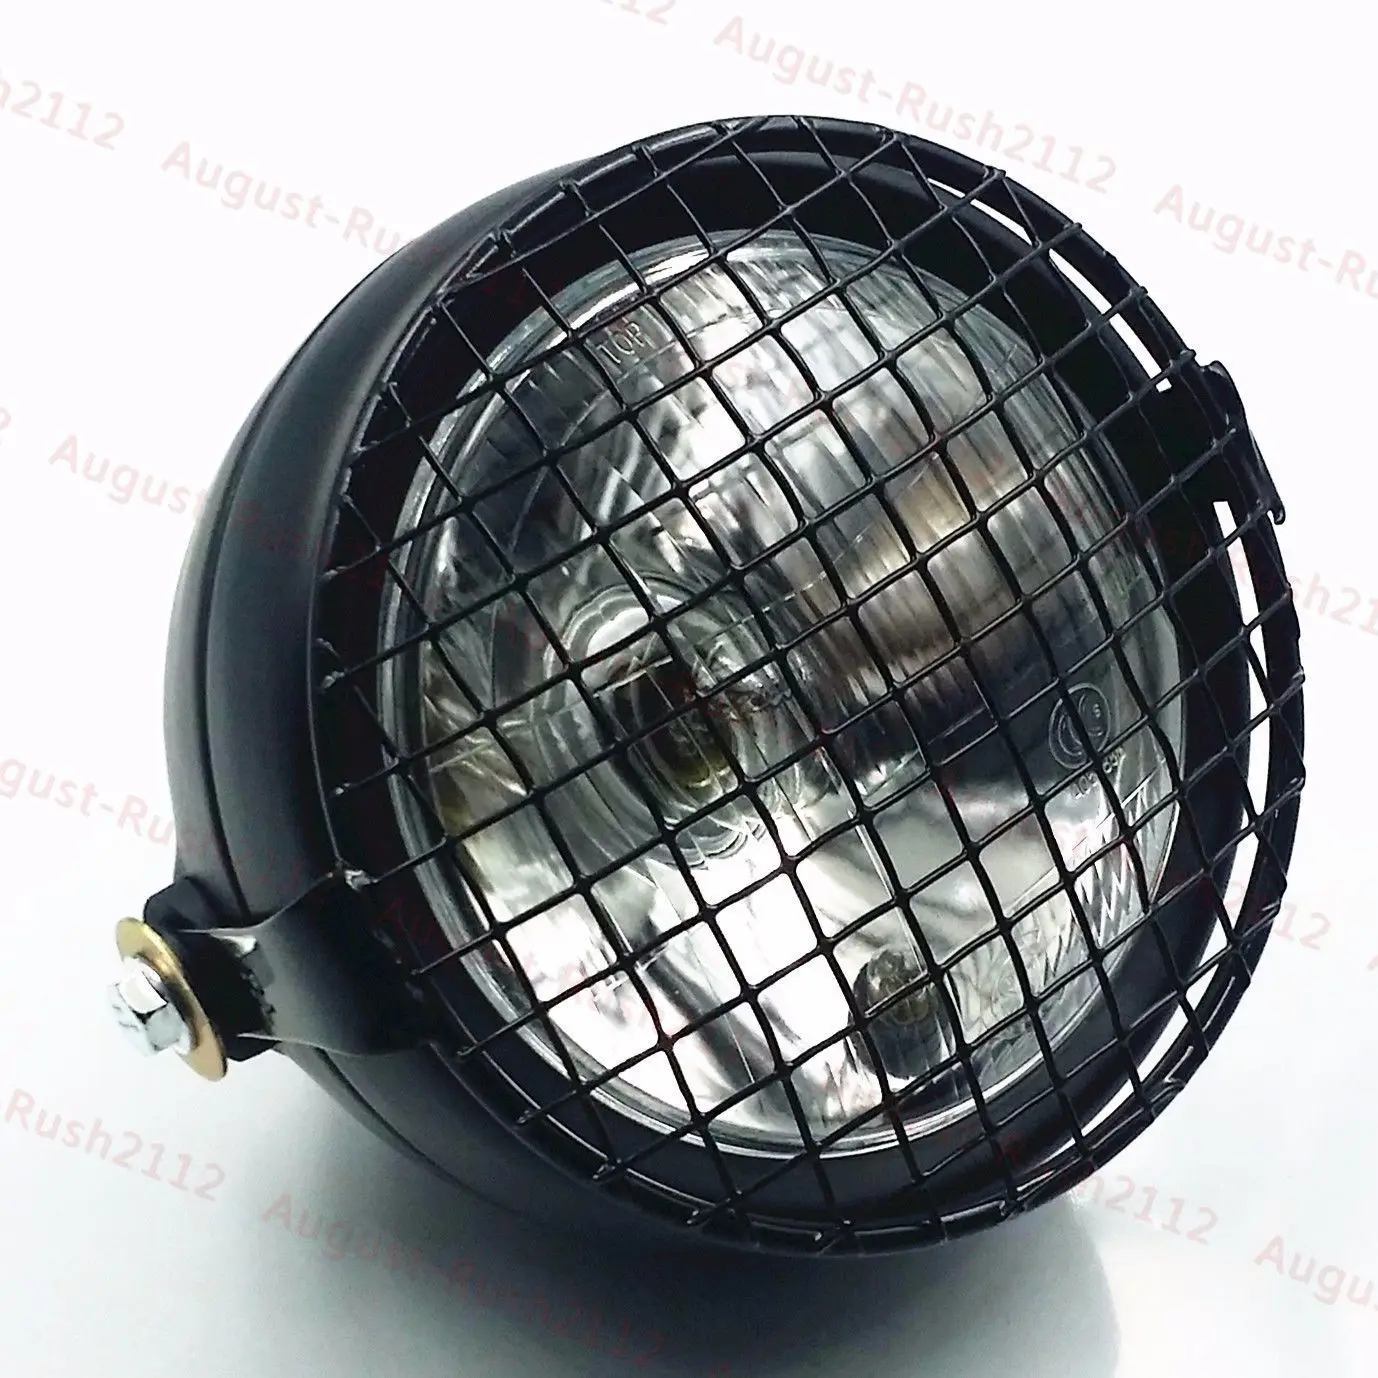 Motorcycle Grill Retro Vintage Side Mount Headlight For Honda Triumph CB Cafe GN